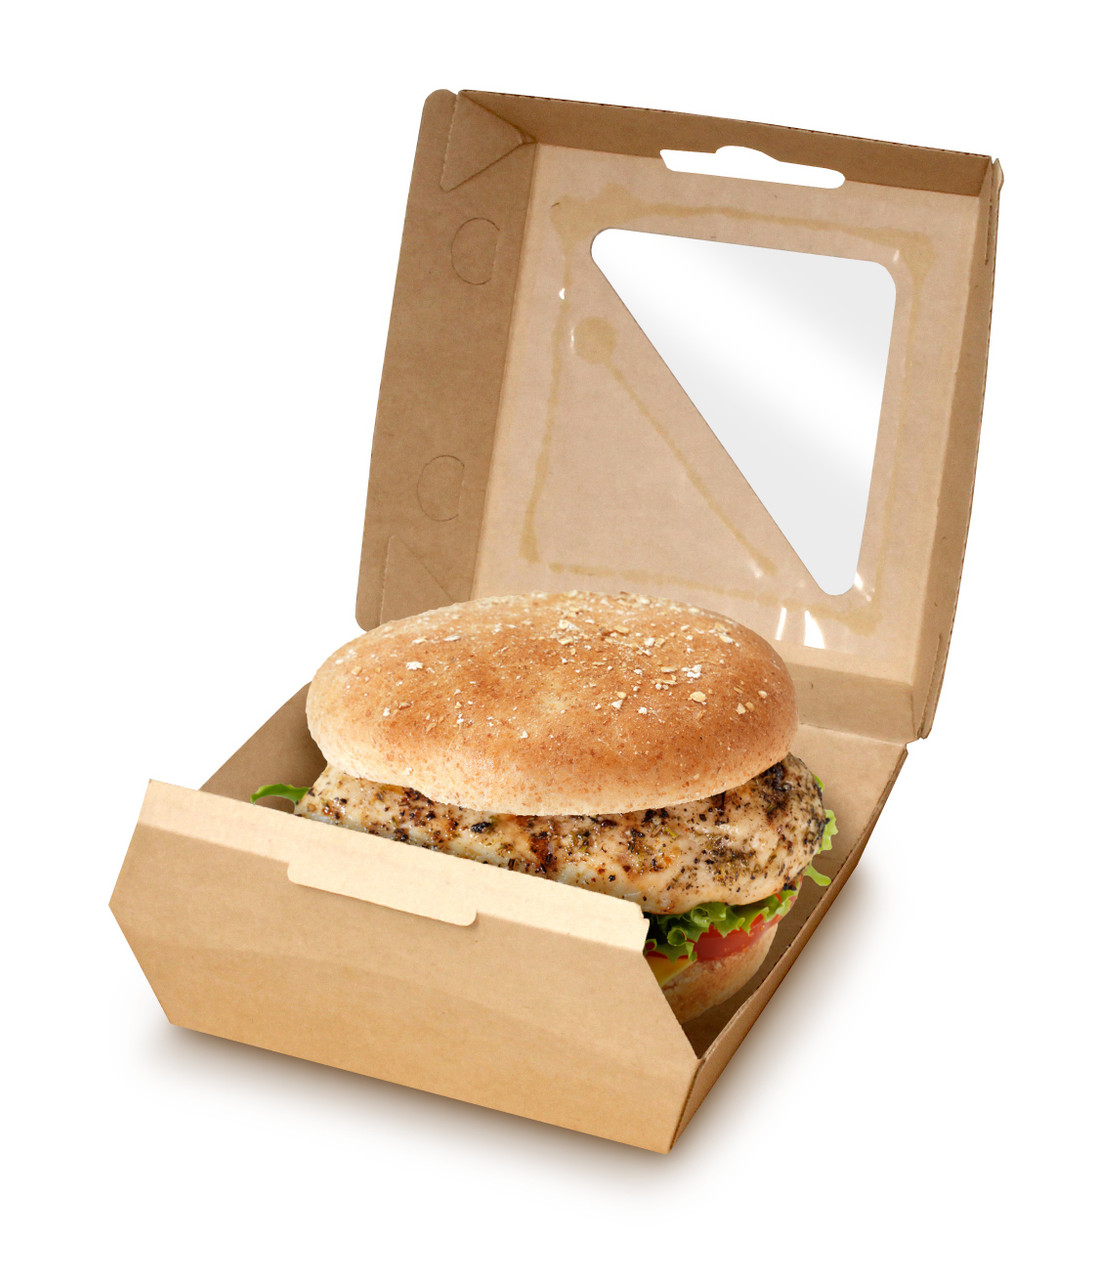 Meals / ToGo! container EcoCraft Eco-Flute ToGo! insulated container -  Dimensions 5.50 x 5.41 x 2.63 (NAT-F505RAVTWF)